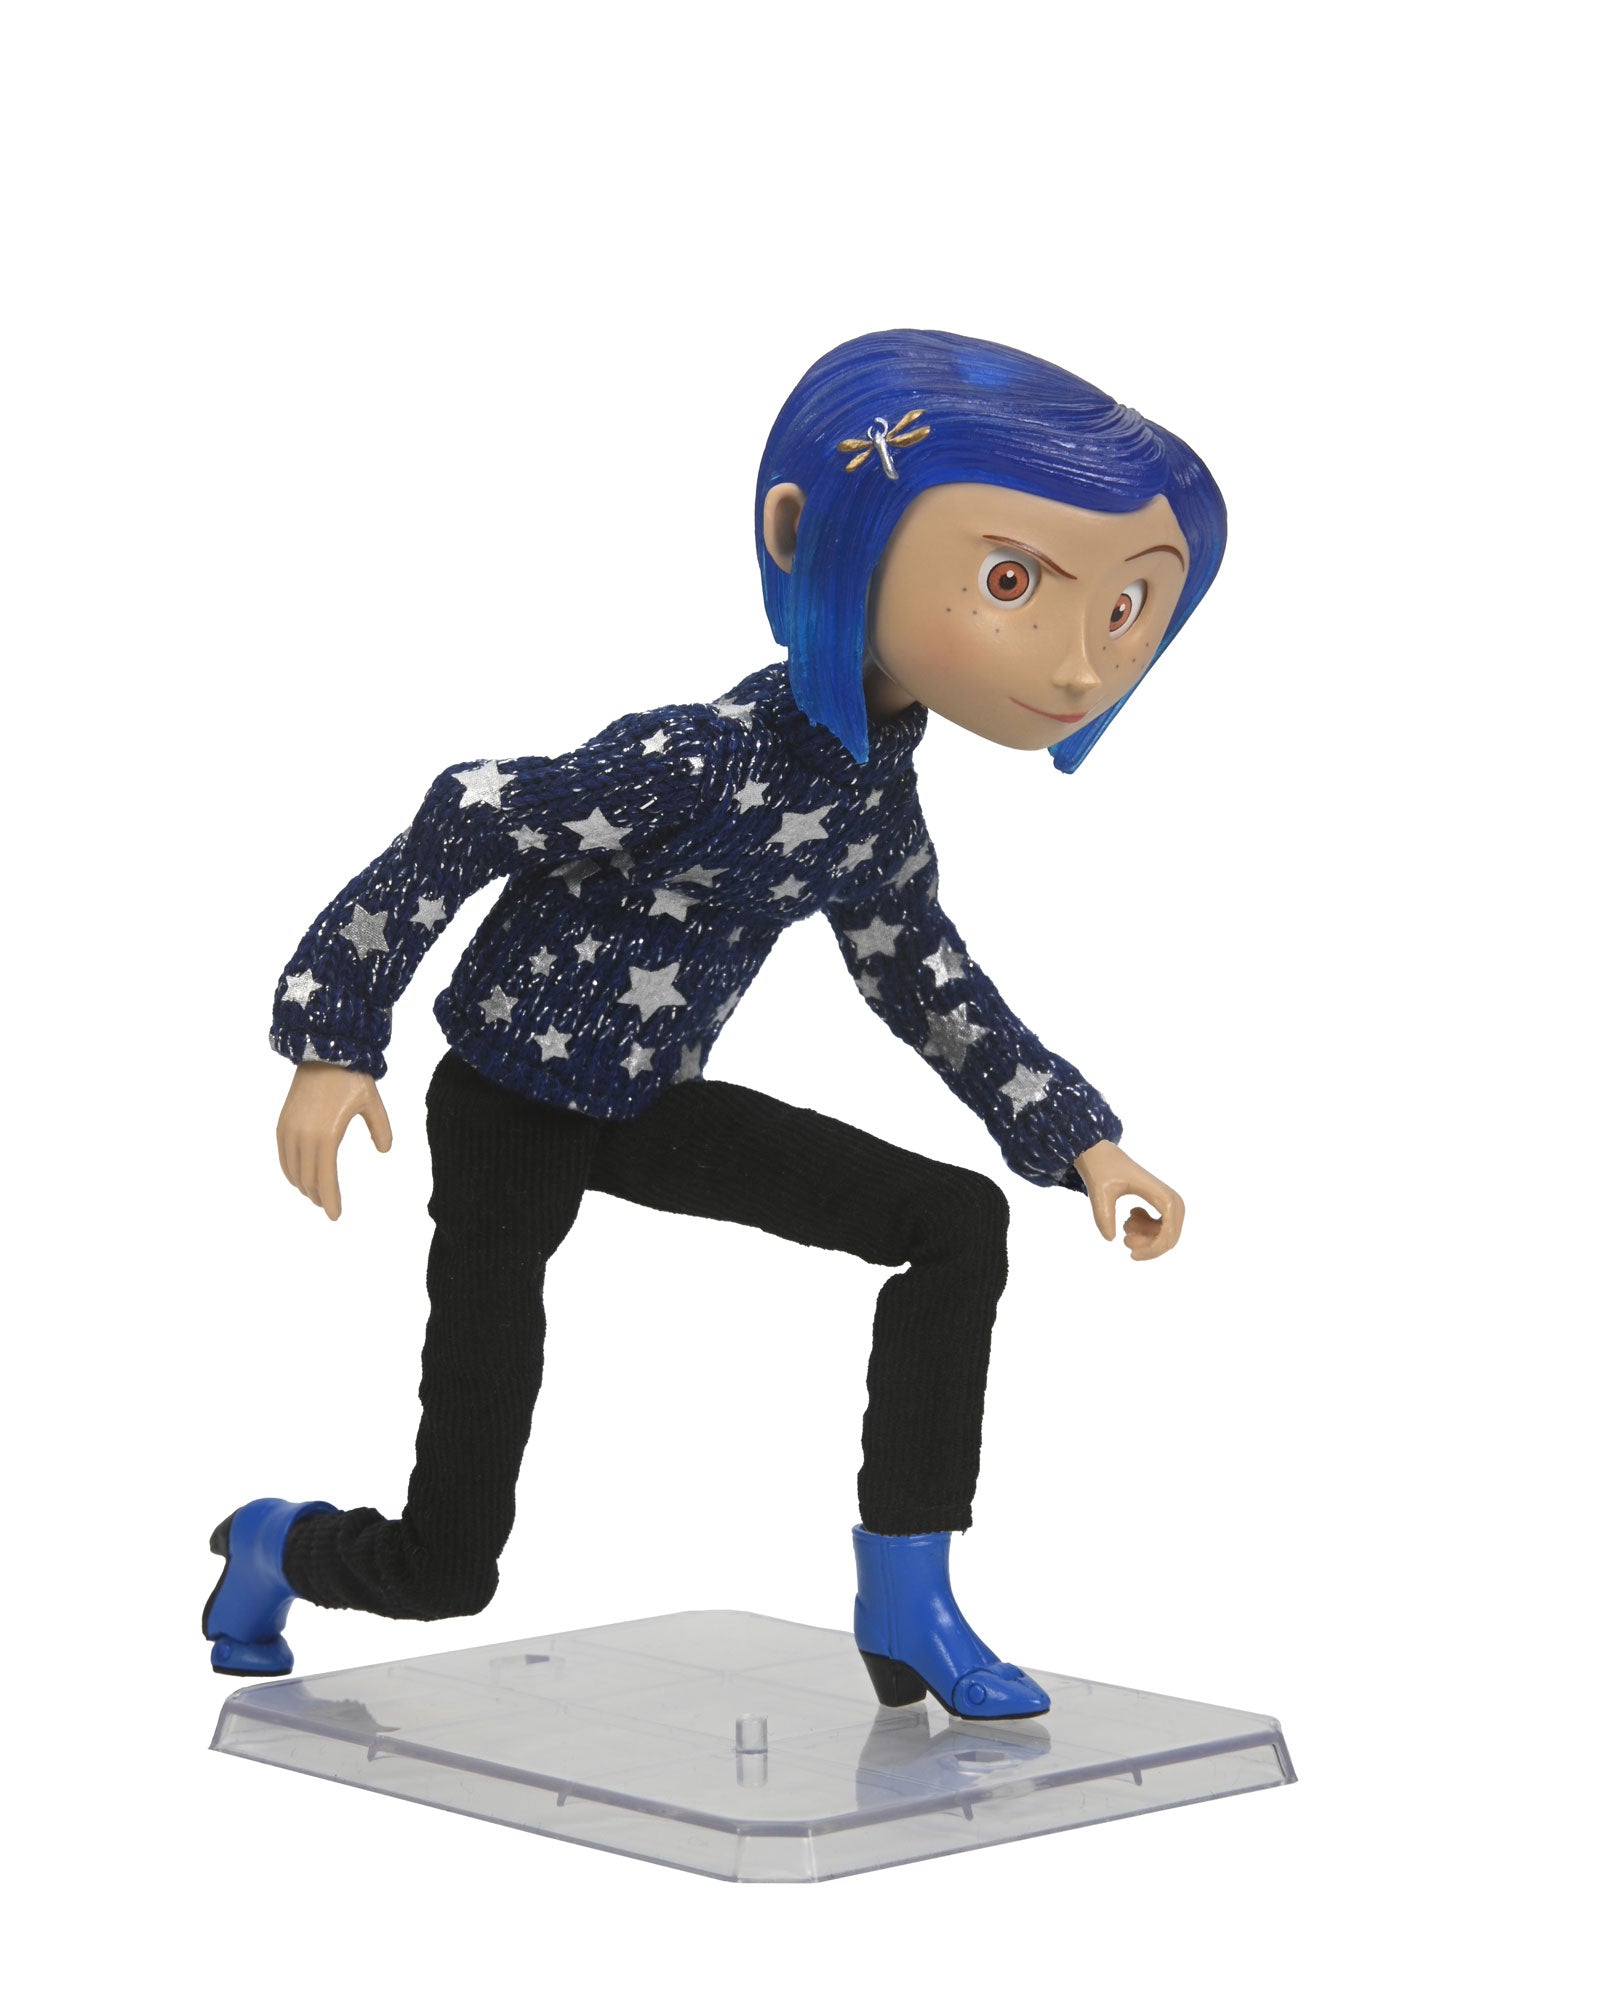 Coraline in Star Sweater 7 Inch Articulated Figure Crouching